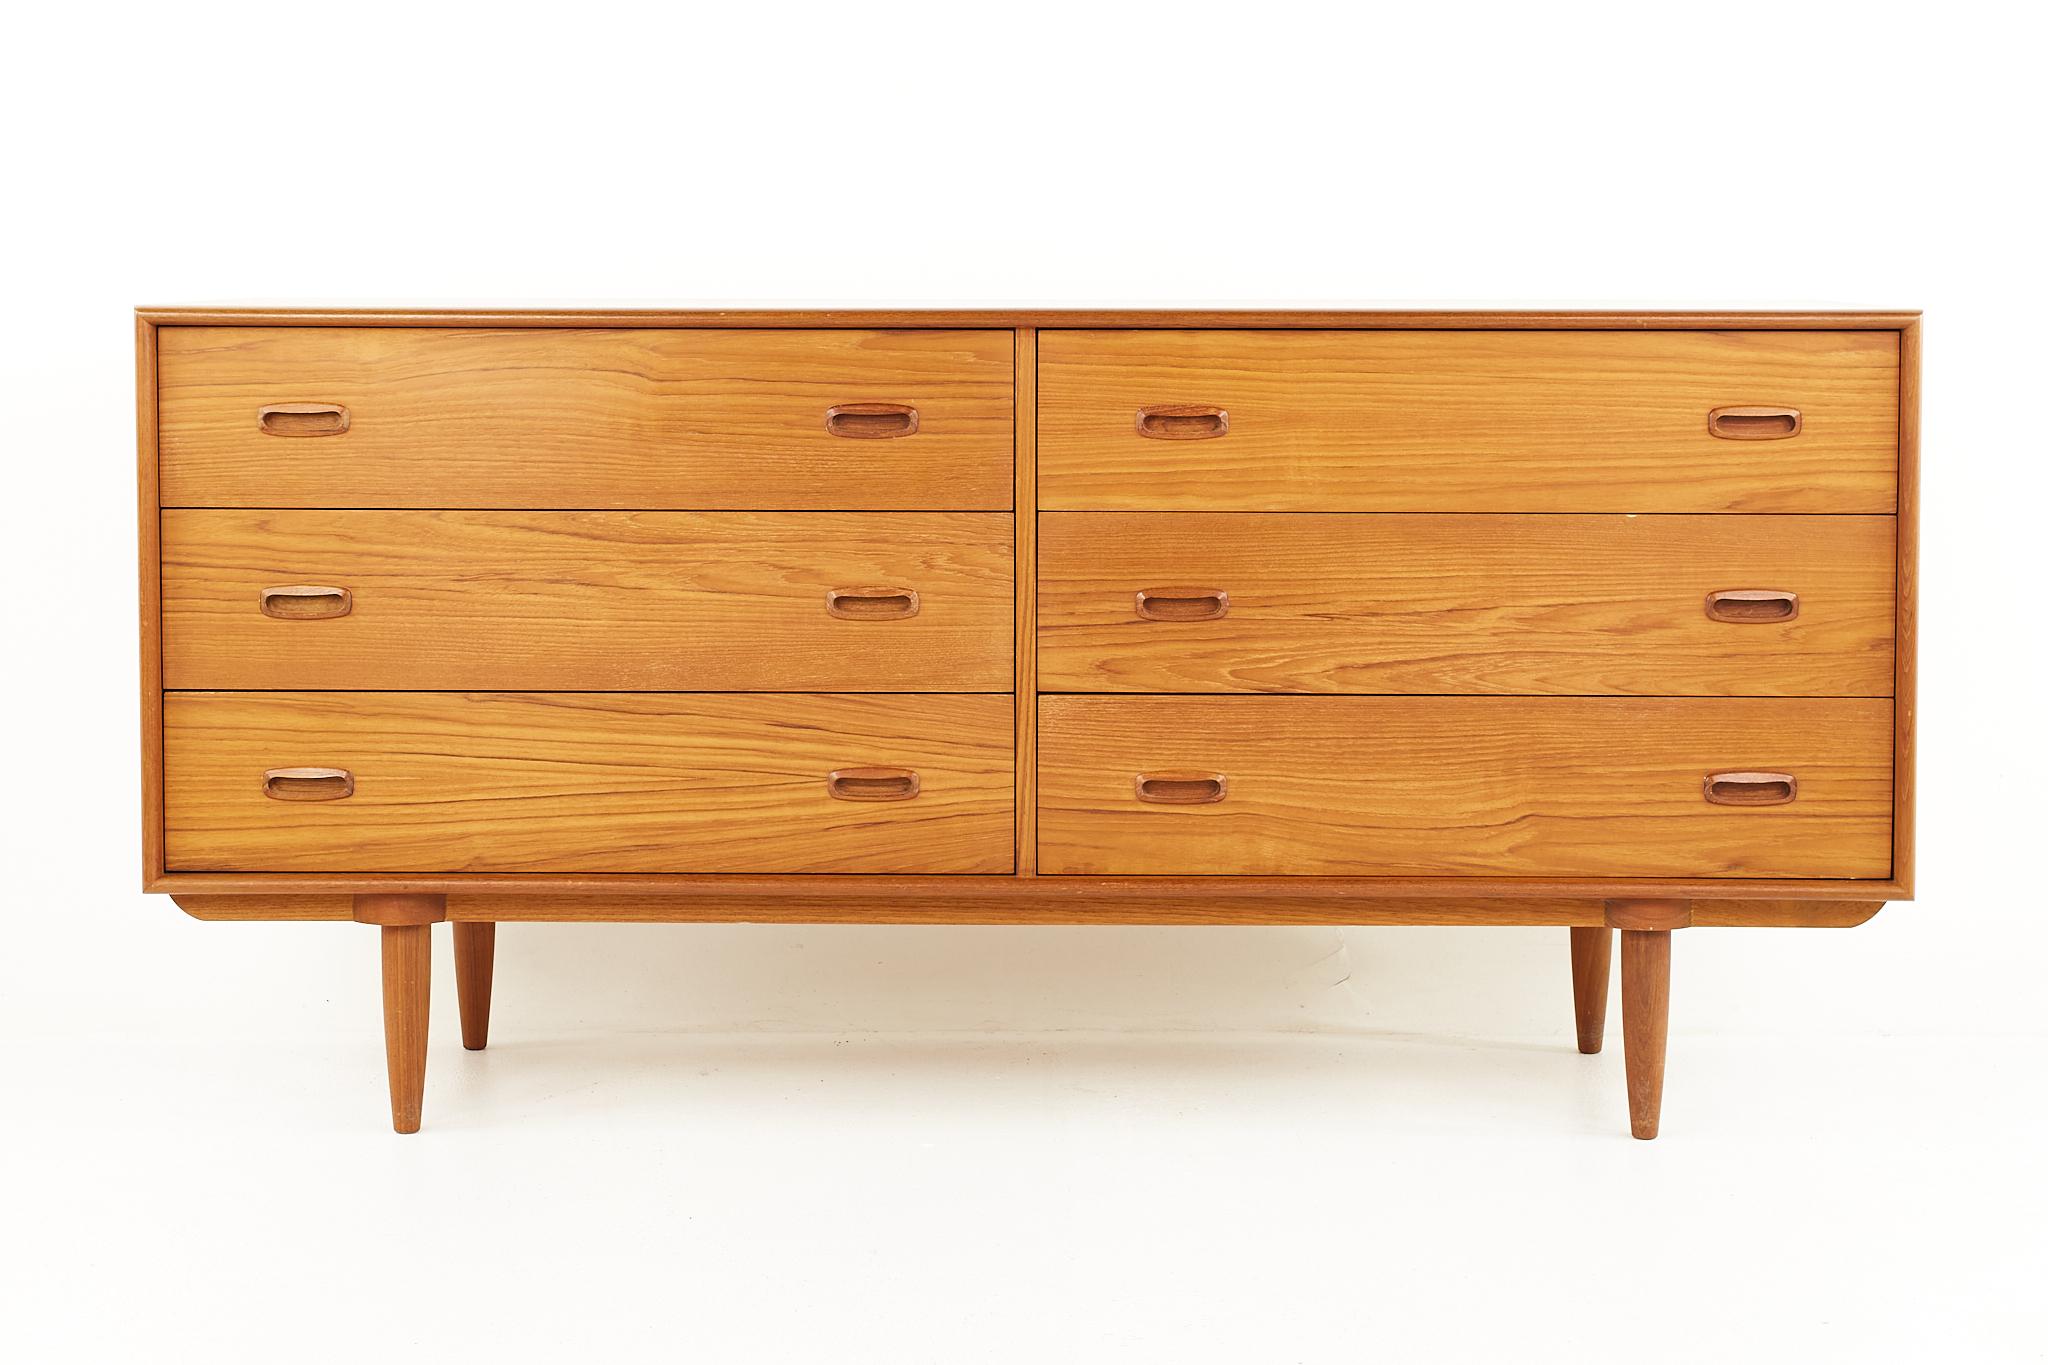 Peter Hvidt style mid century teak 6 drawer lowboy dresser

The dresser measures: 63 wide x 18.5 deep x 30 inches high

All pieces of furniture can be had in what we call restored vintage condition. That means the piece is restored upon purchase